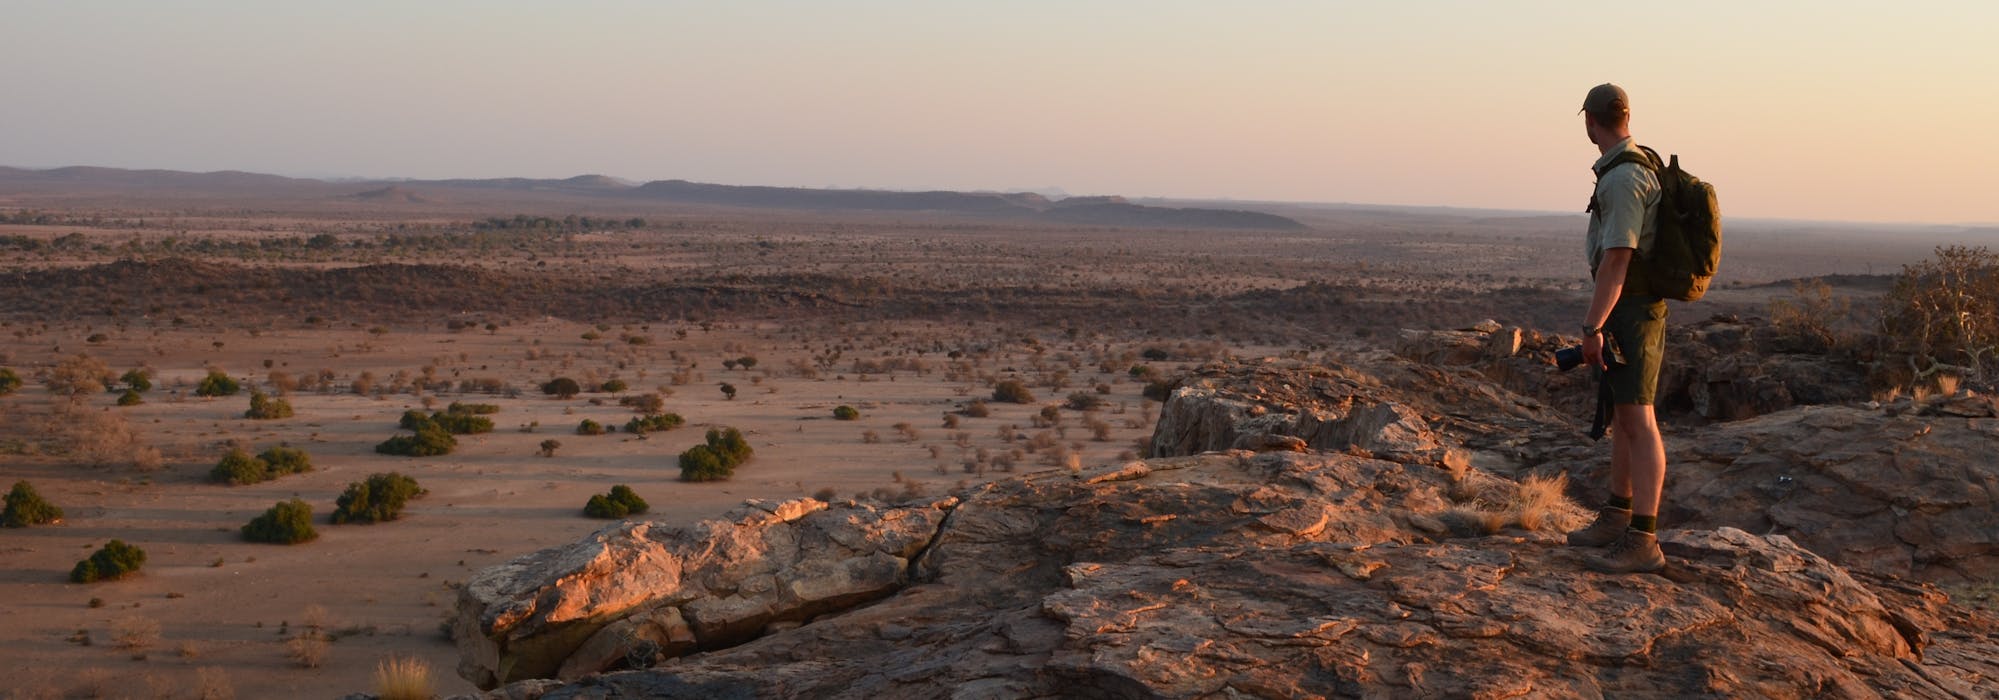 An ACE volunteer standing on a rocky outcrop in the African bush surveying the landscape at sunset